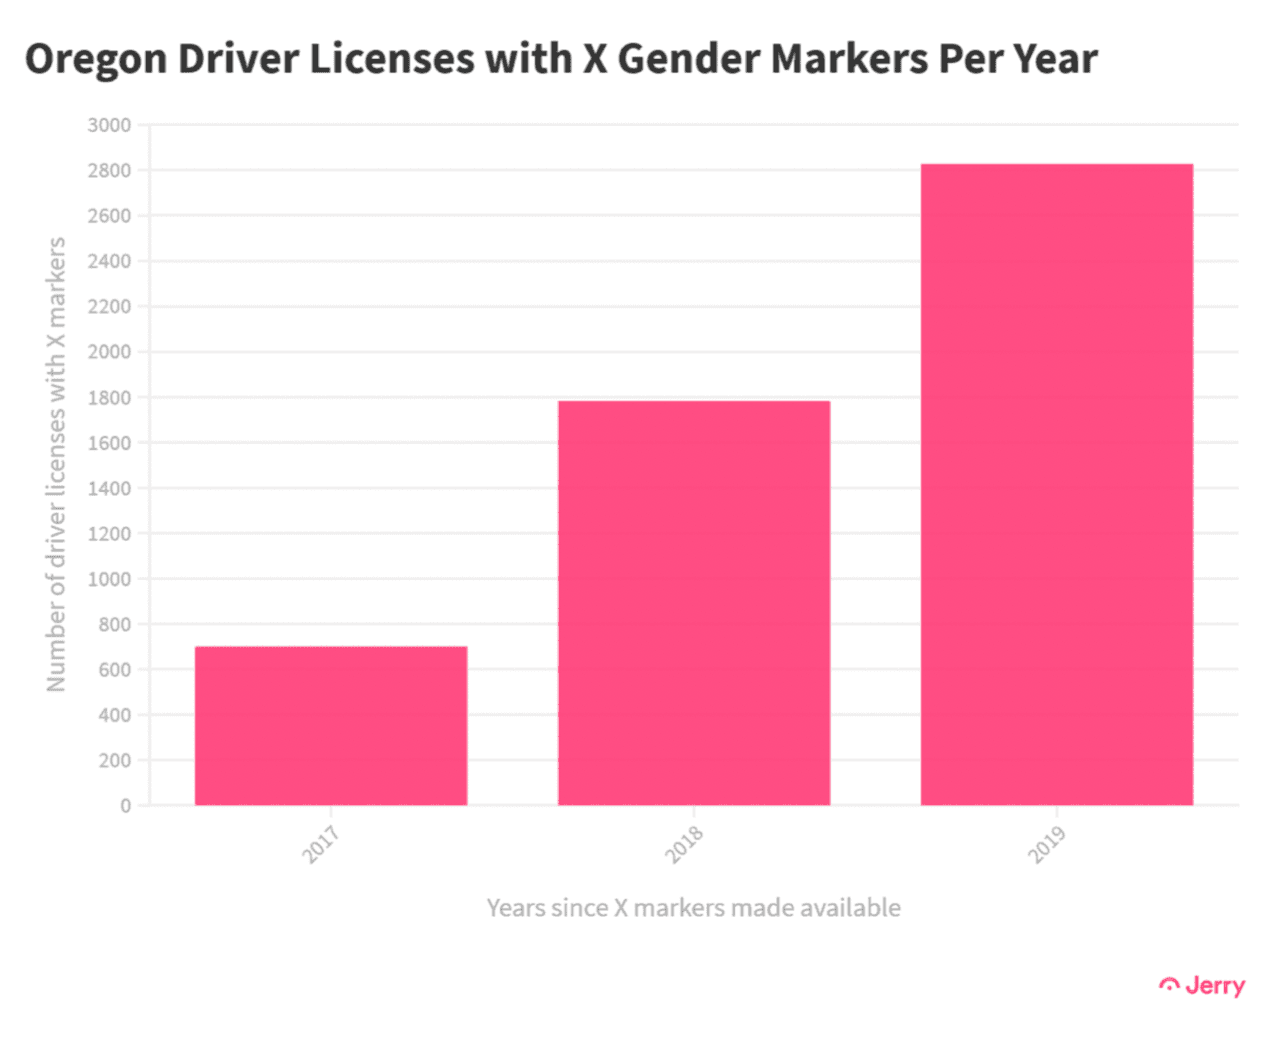 Oregon Driver's Licenses with X Gender Markers per Year